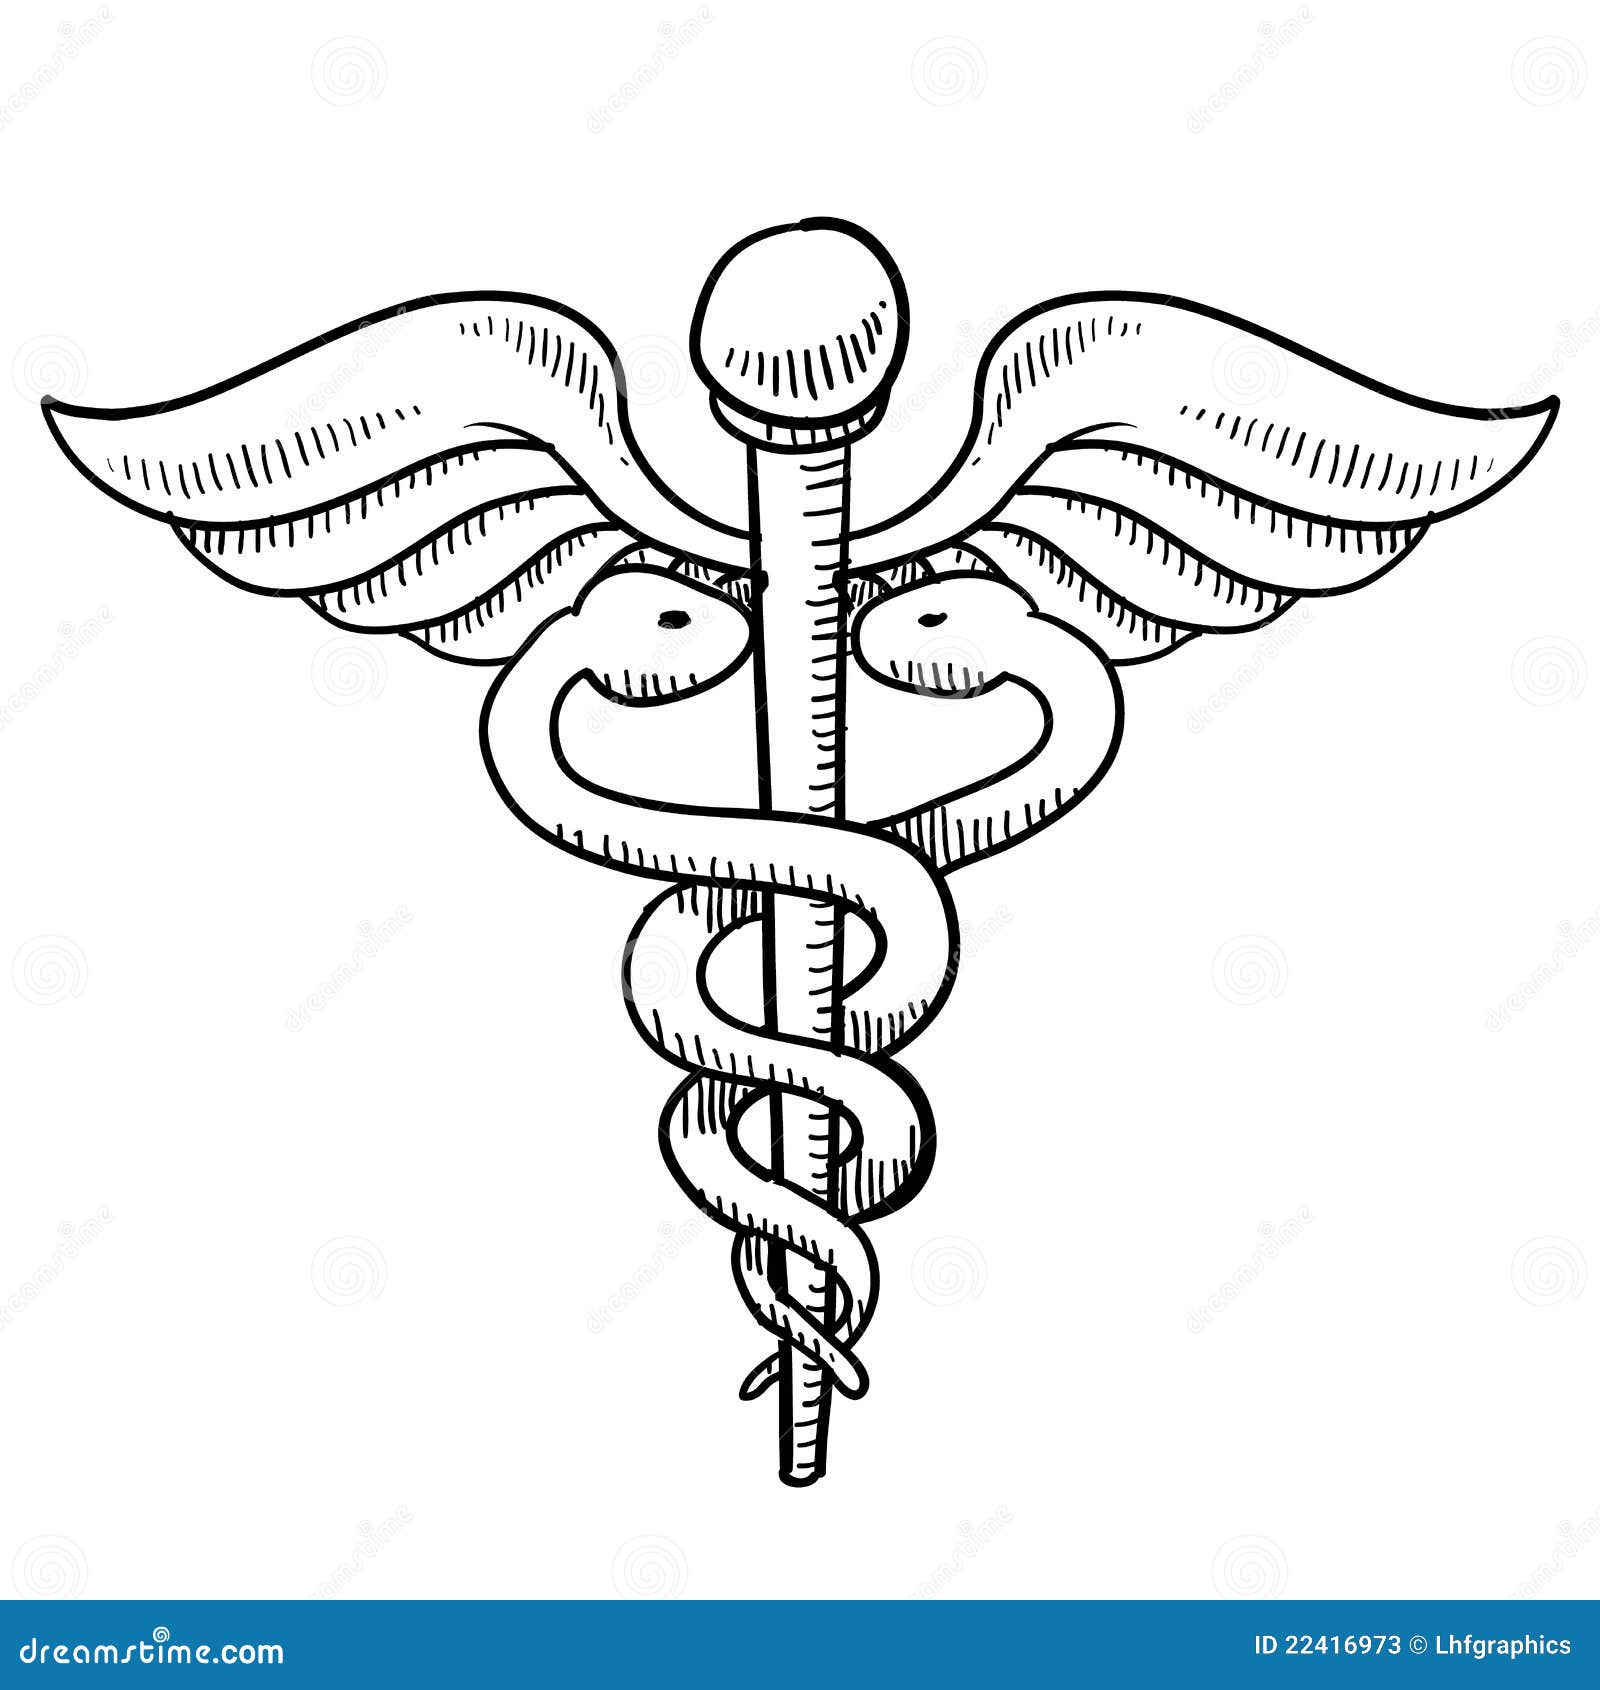 Premium Vector | Caduceus medical symbol hand drawn outline doodle icon.  medical snakes wings wand as medicine system and health care concept.  vector sketch illustration for web and infographics on white background.